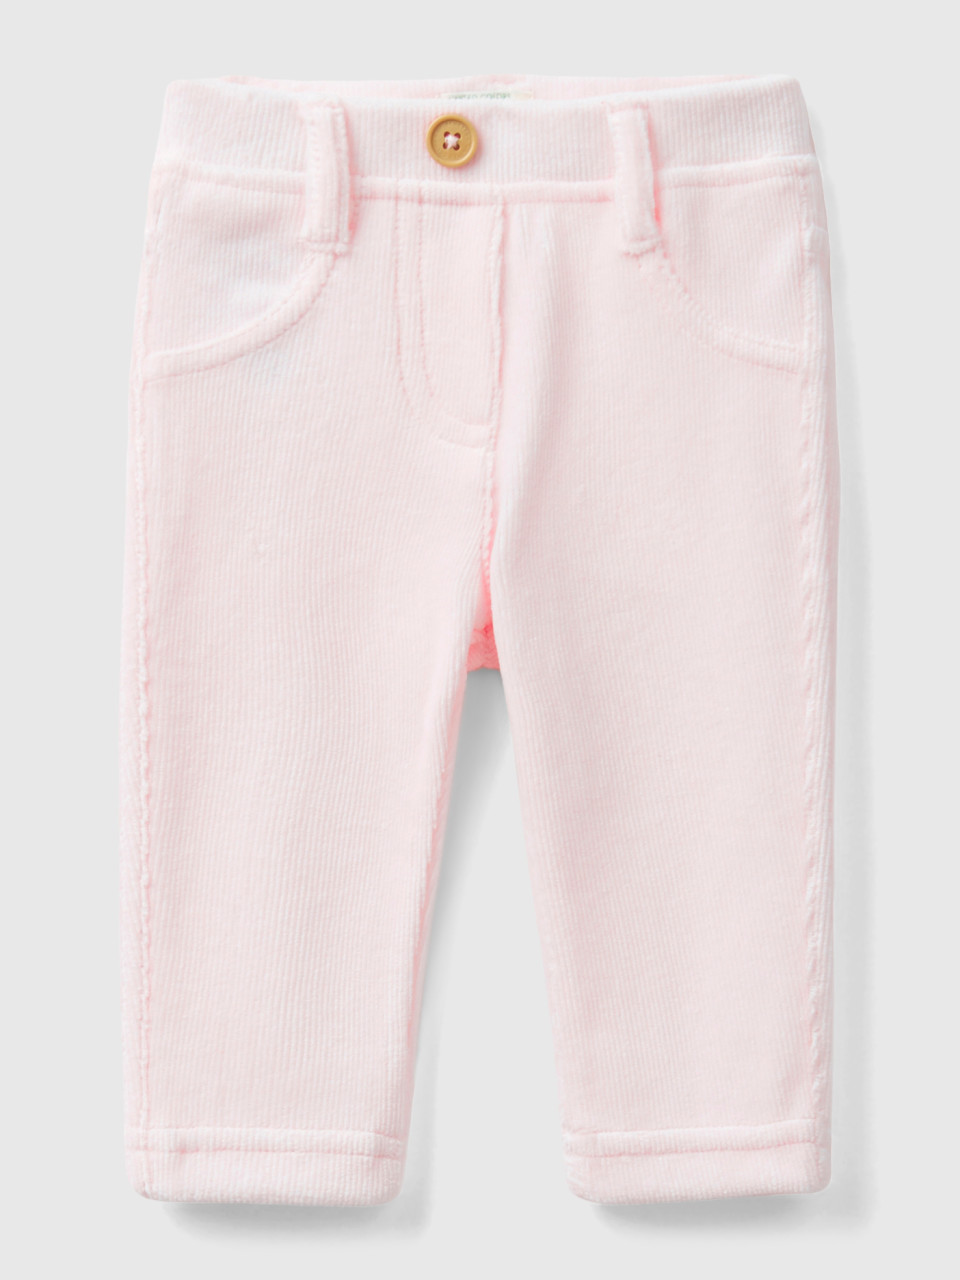 Benetton, Chenille Stretch Trousers, Soft Pink, Kids